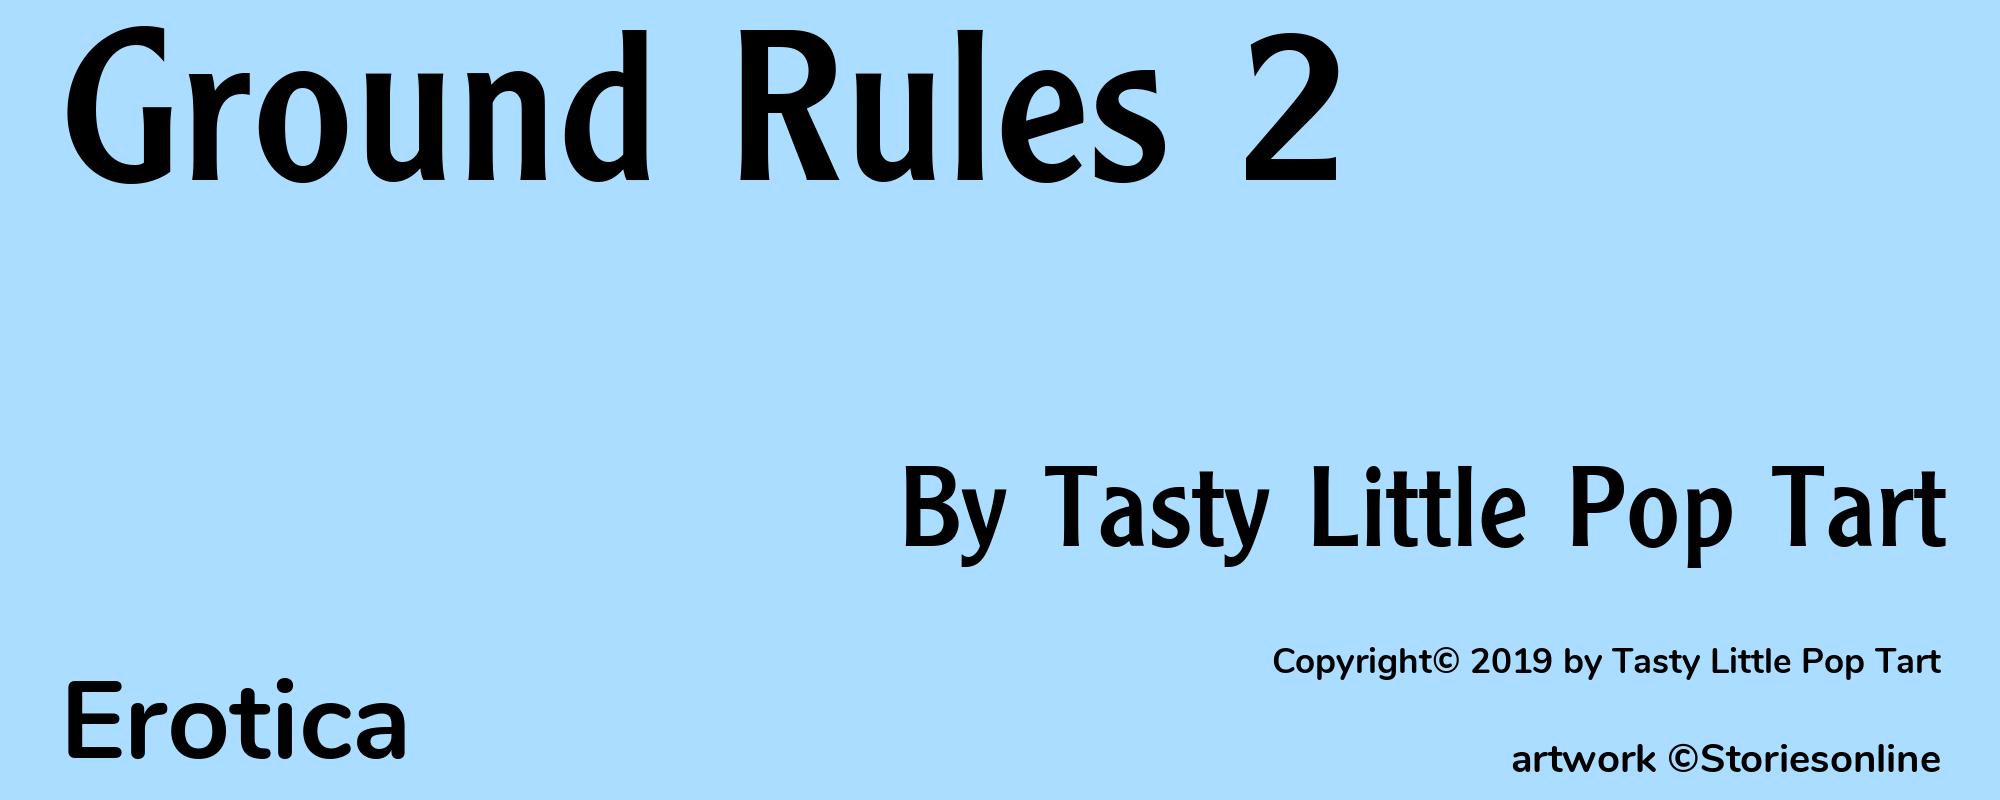 Ground Rules 2 - Cover